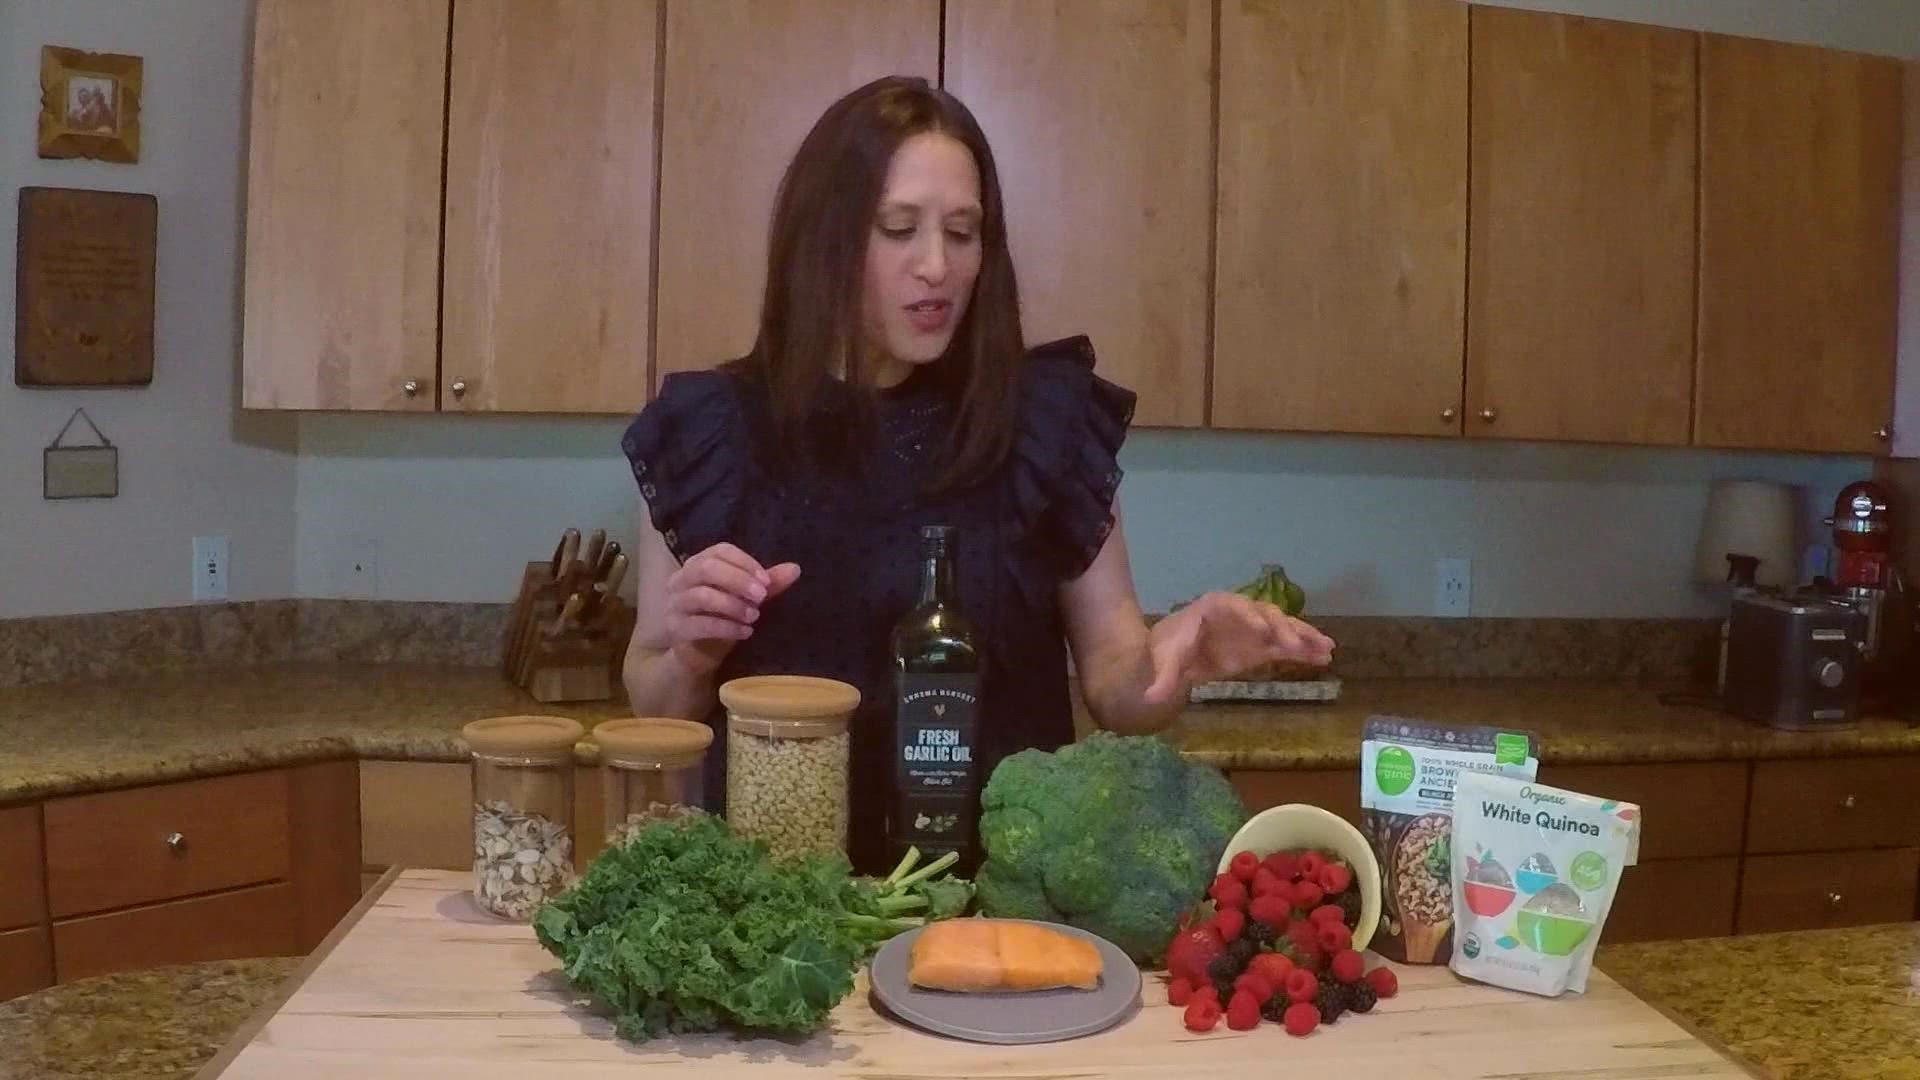 9NEWS Nutrition Expert Kristin Kirkpatrick discusses the MIND diet and the ways it can help improve brain health.